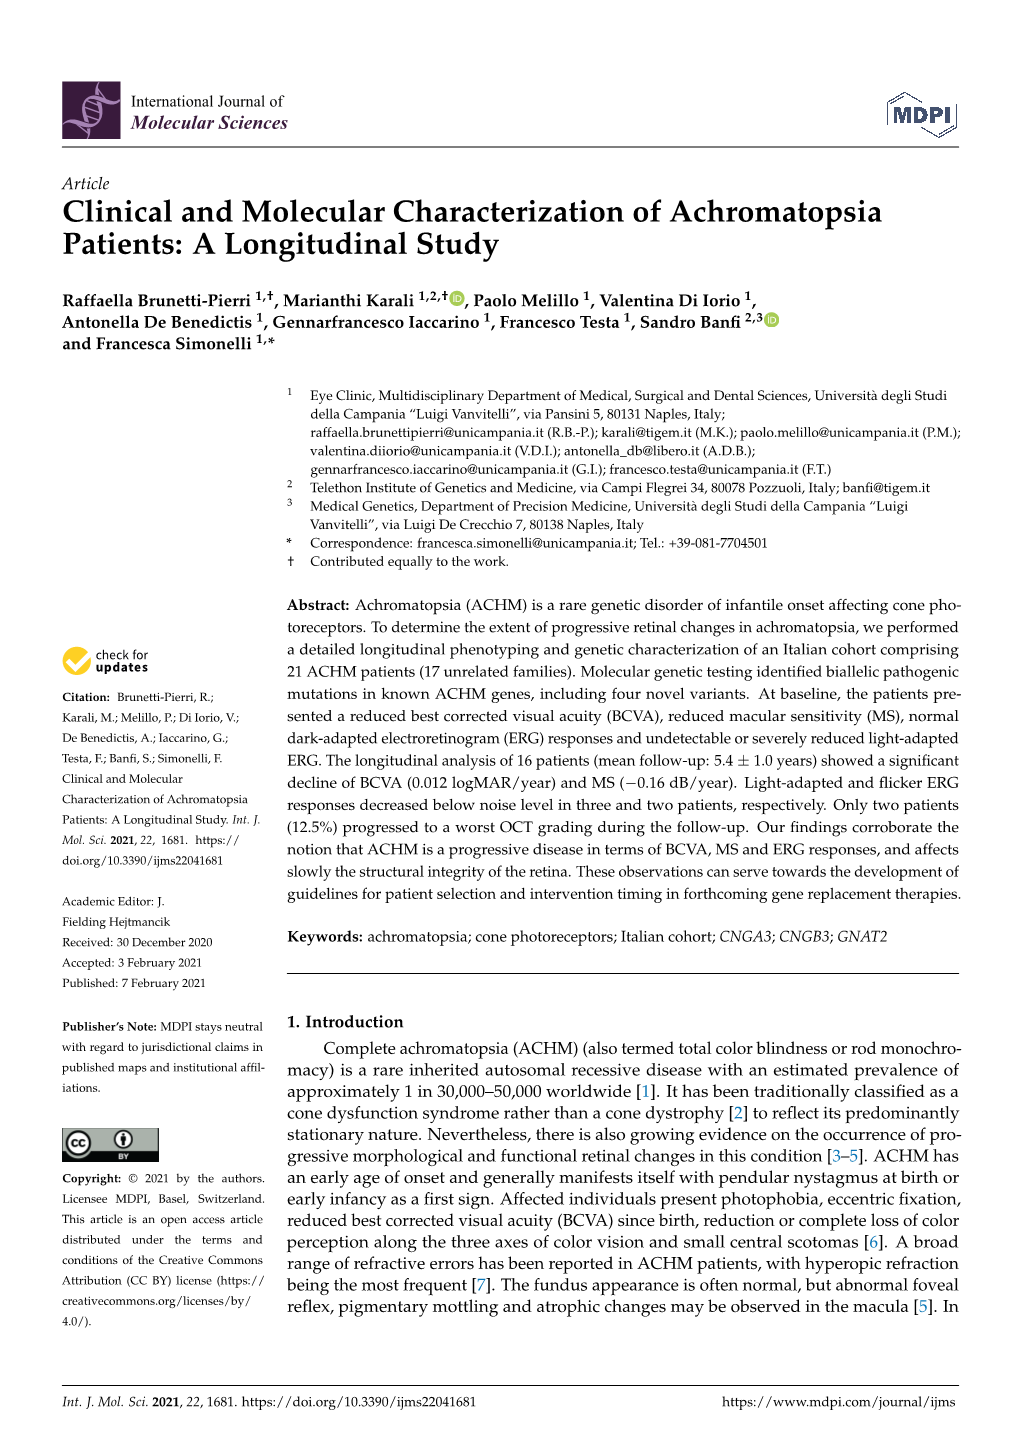 Clinical and Molecular Characterization of Achromatopsia Patients: a Longitudinal Study